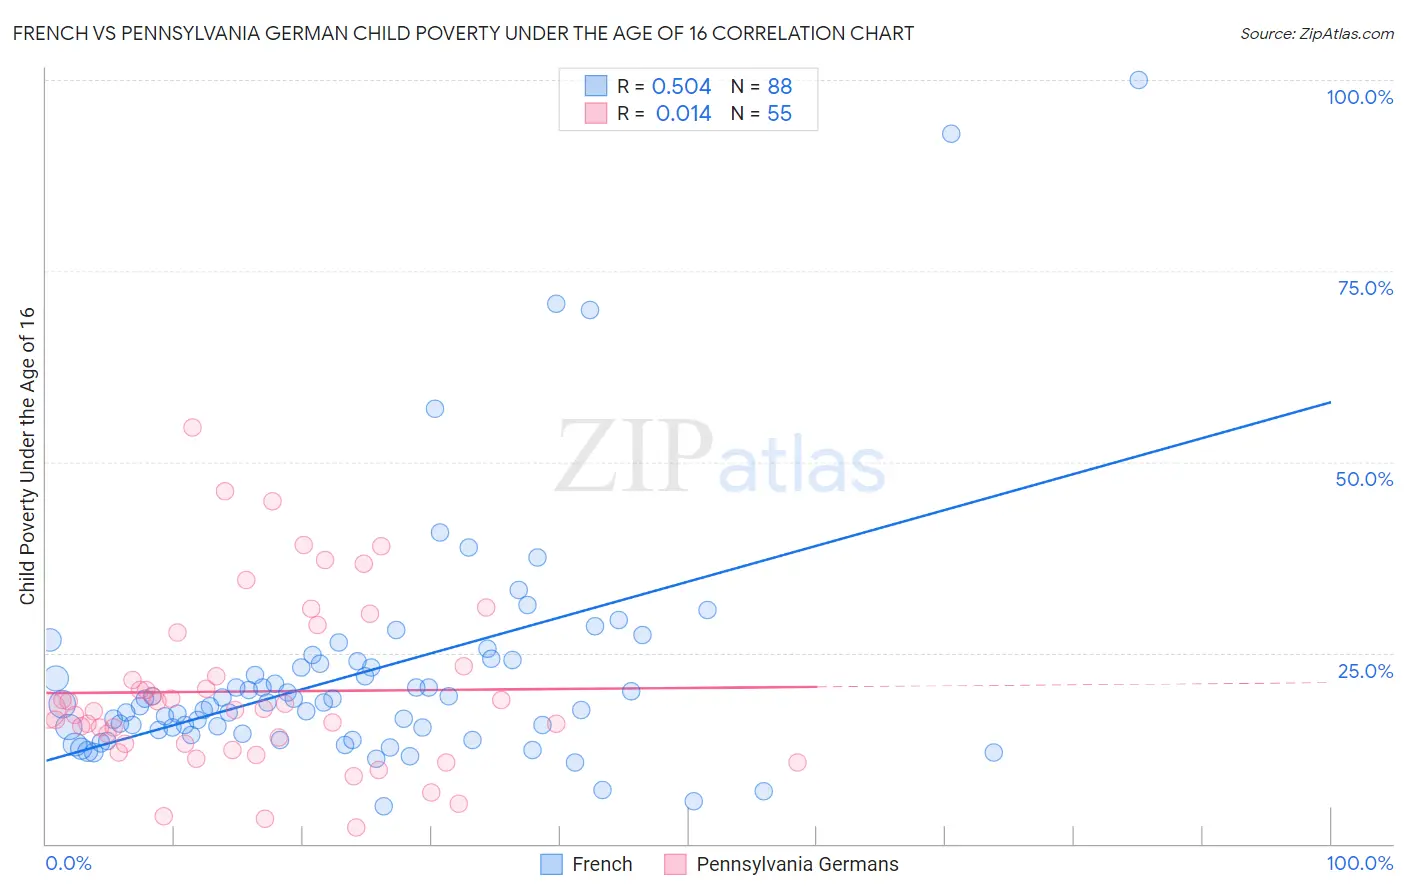 French vs Pennsylvania German Child Poverty Under the Age of 16